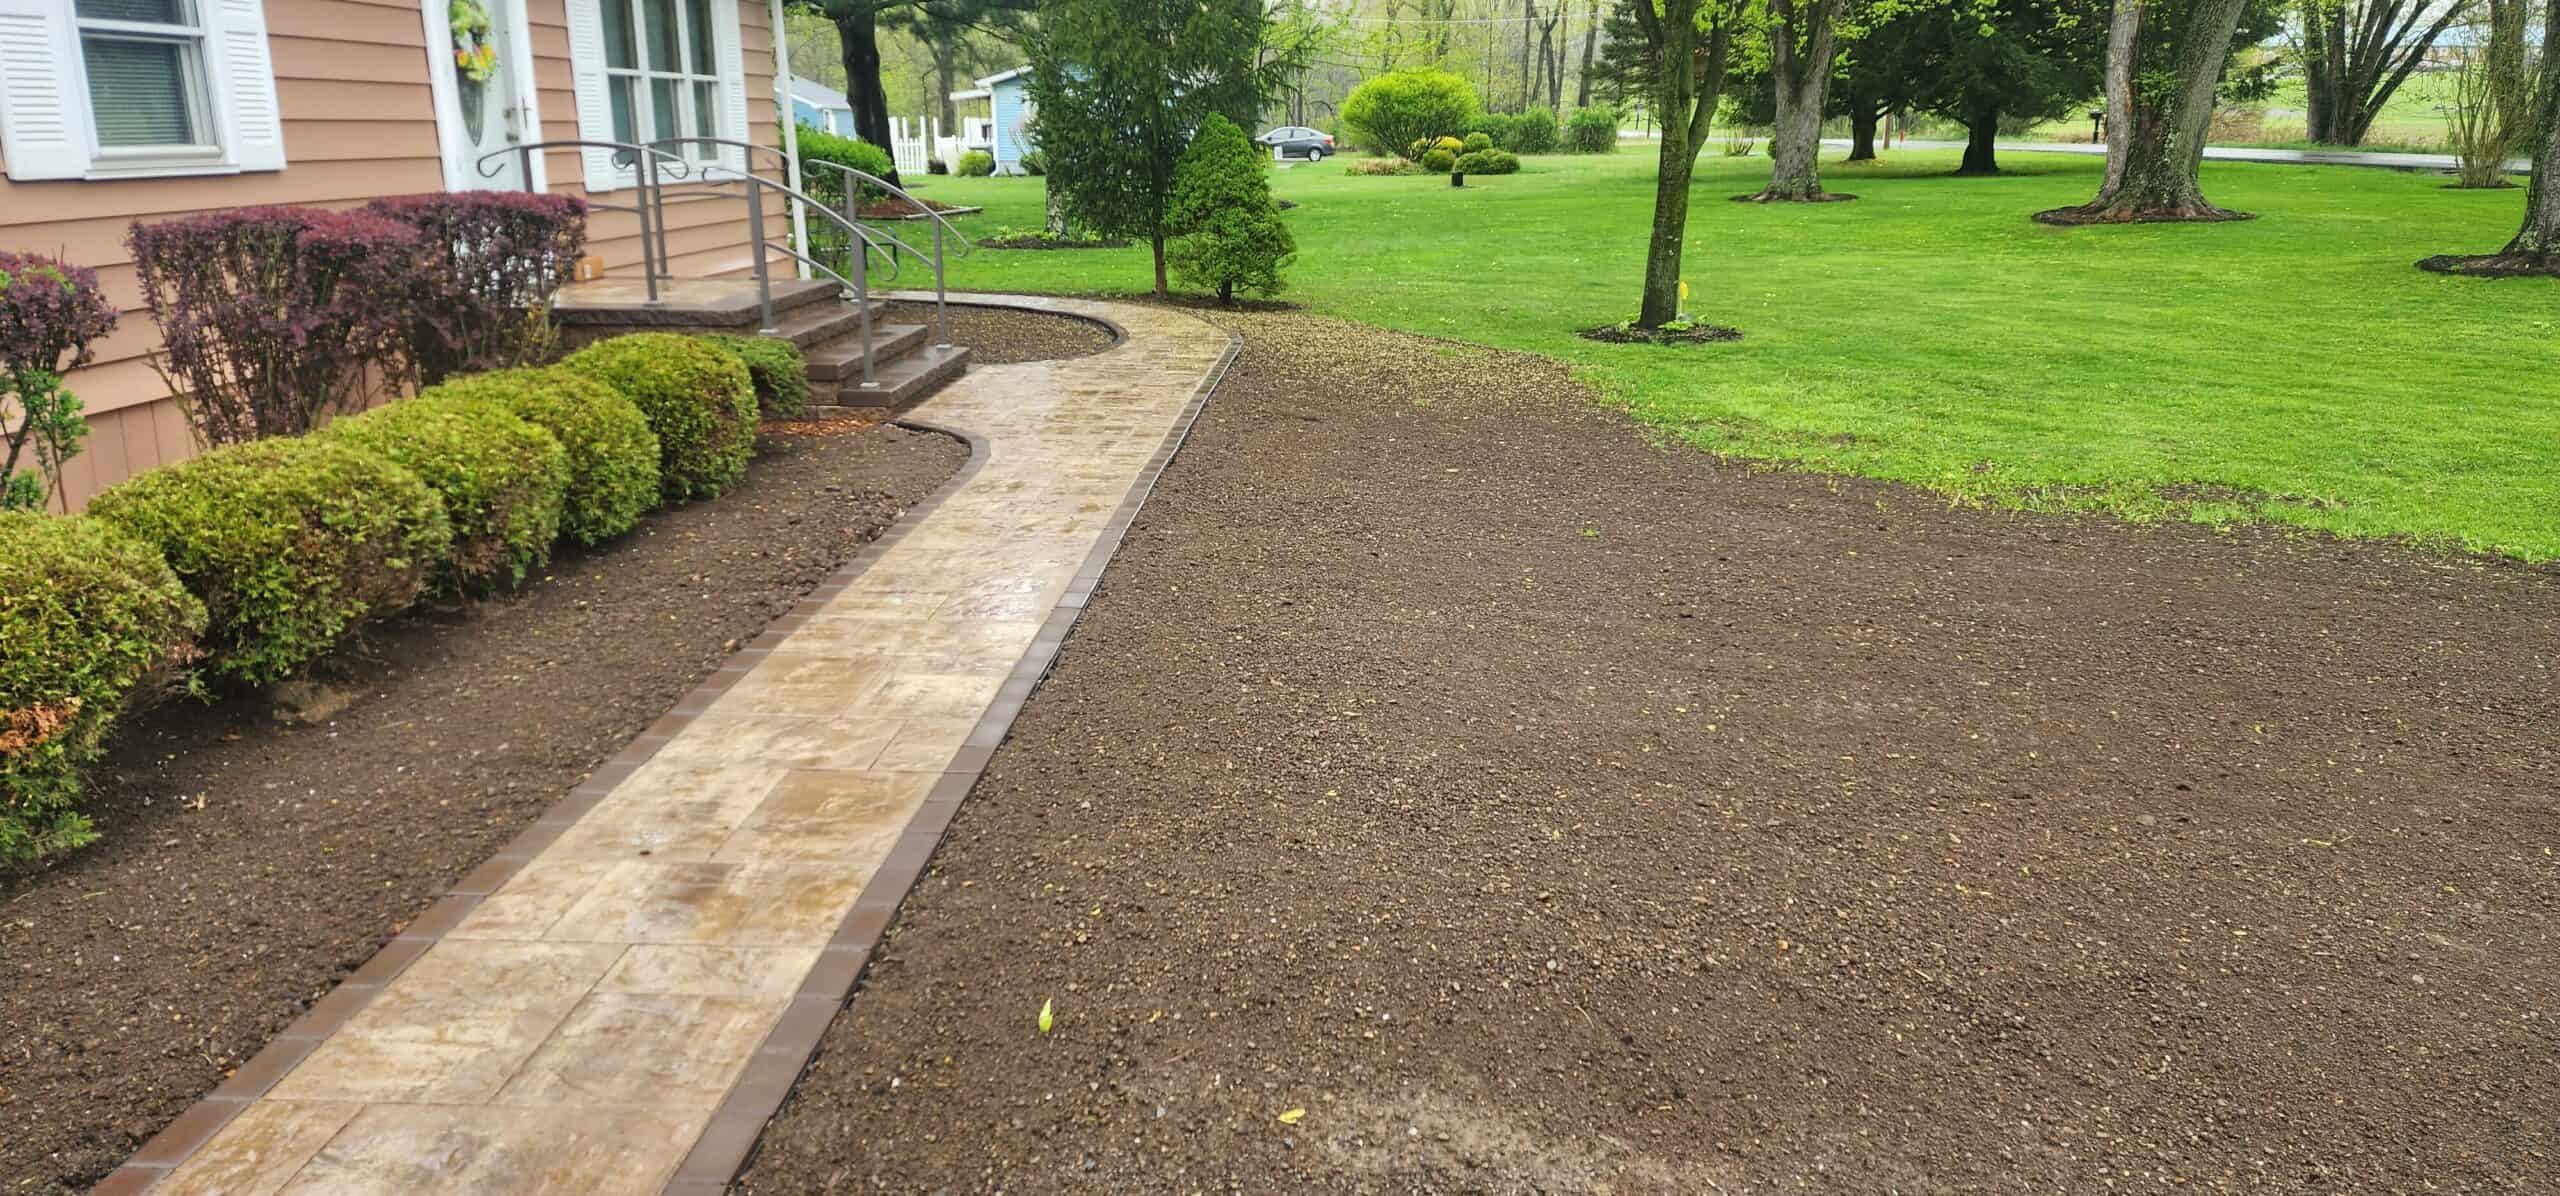 Schedule hardscaping installation and maintenance to ensure PA property longevity